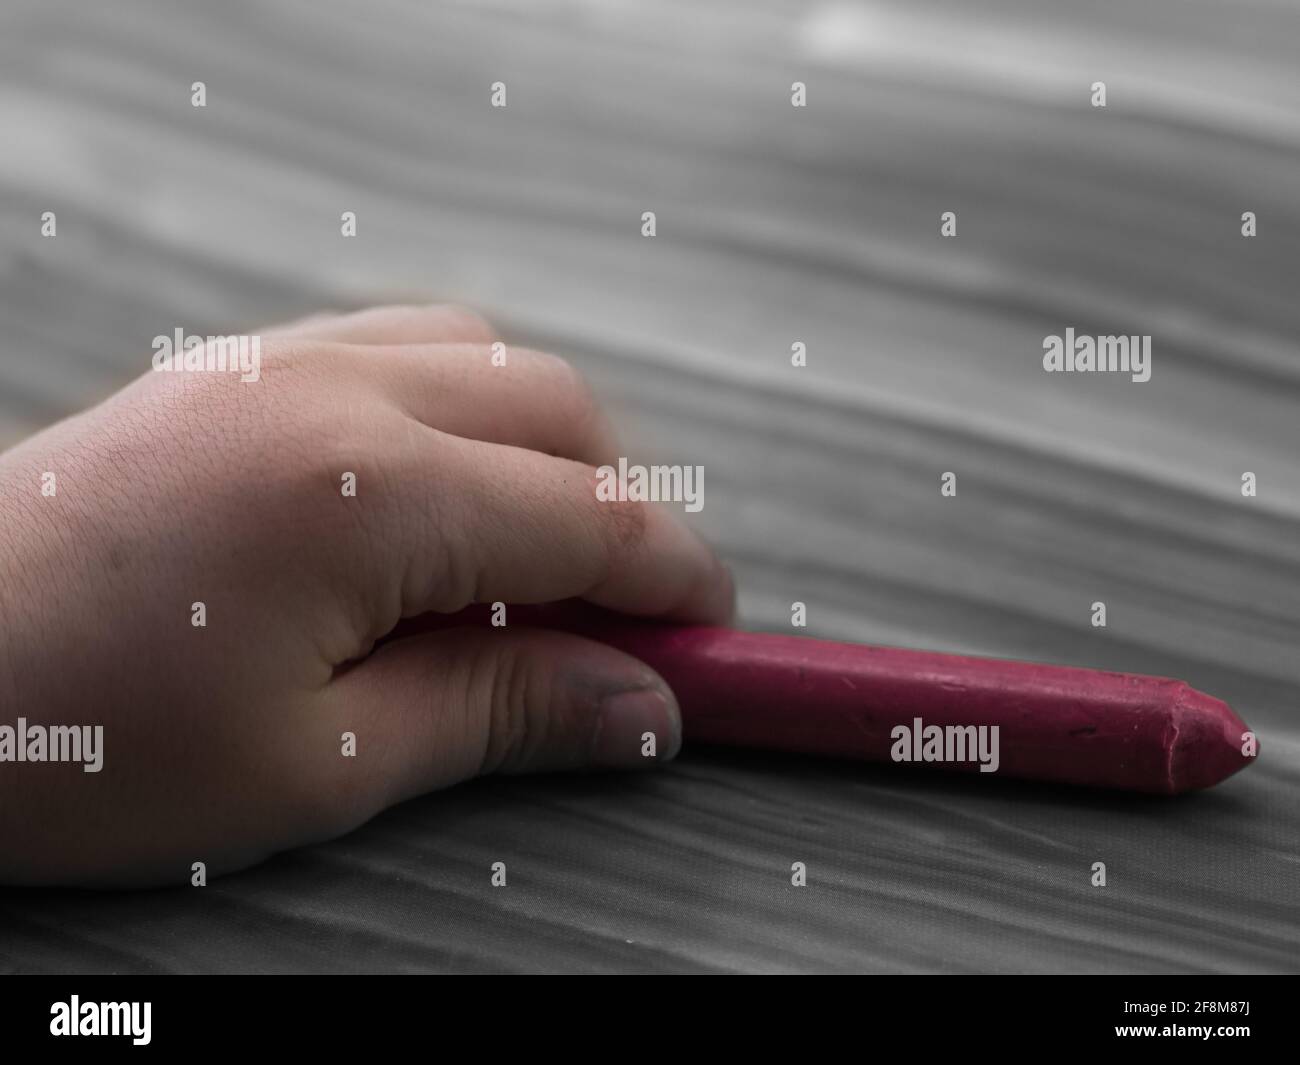 close-up of a child's hand holding a crayon, on a light wooden background Stock Photo